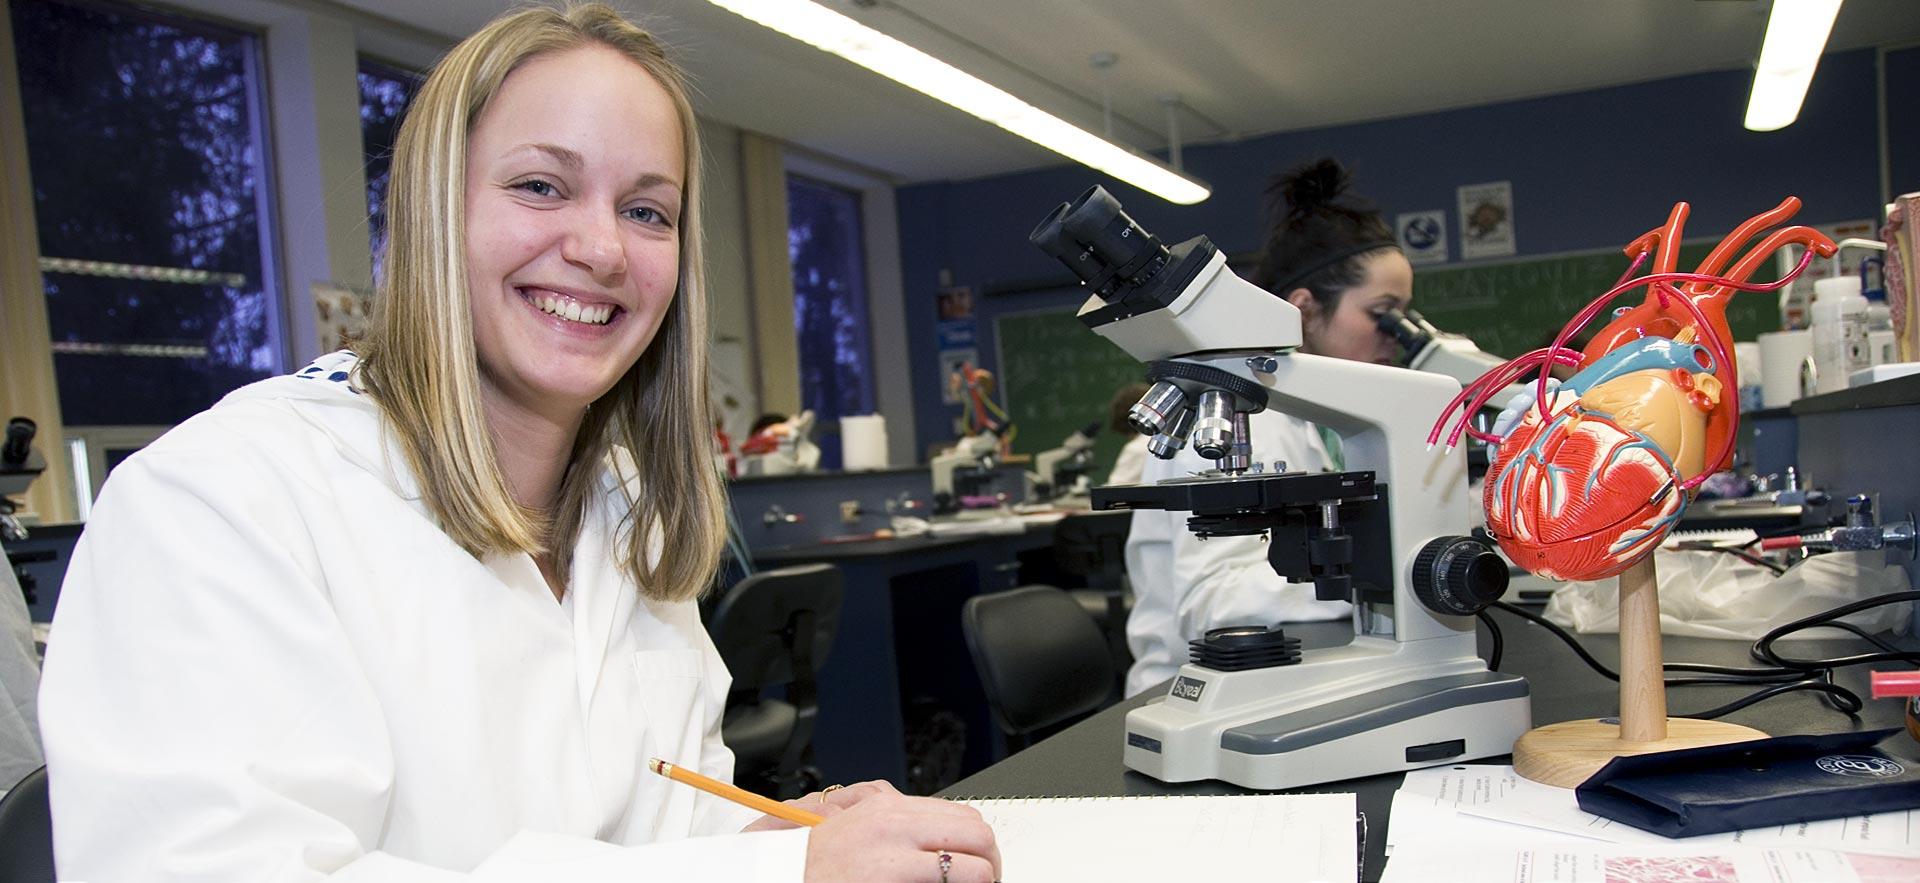 Female nursing student smiles while working on a lab assignment.